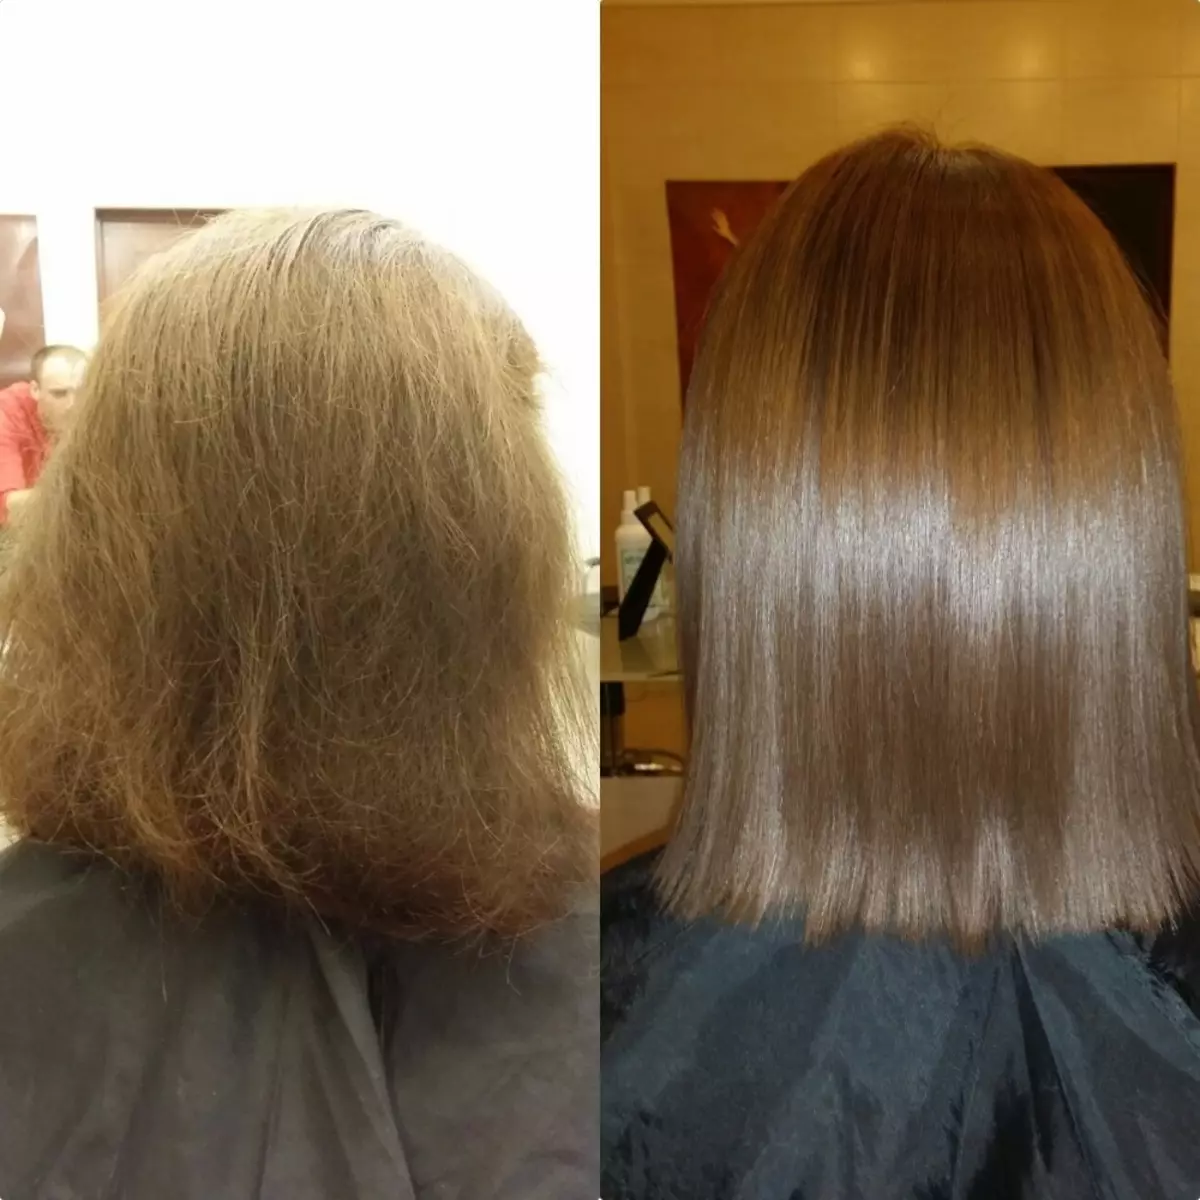 Keratin hair straightening at home: how to make it at home gelatin? Simple recipes. What is needed for this? 16616_9